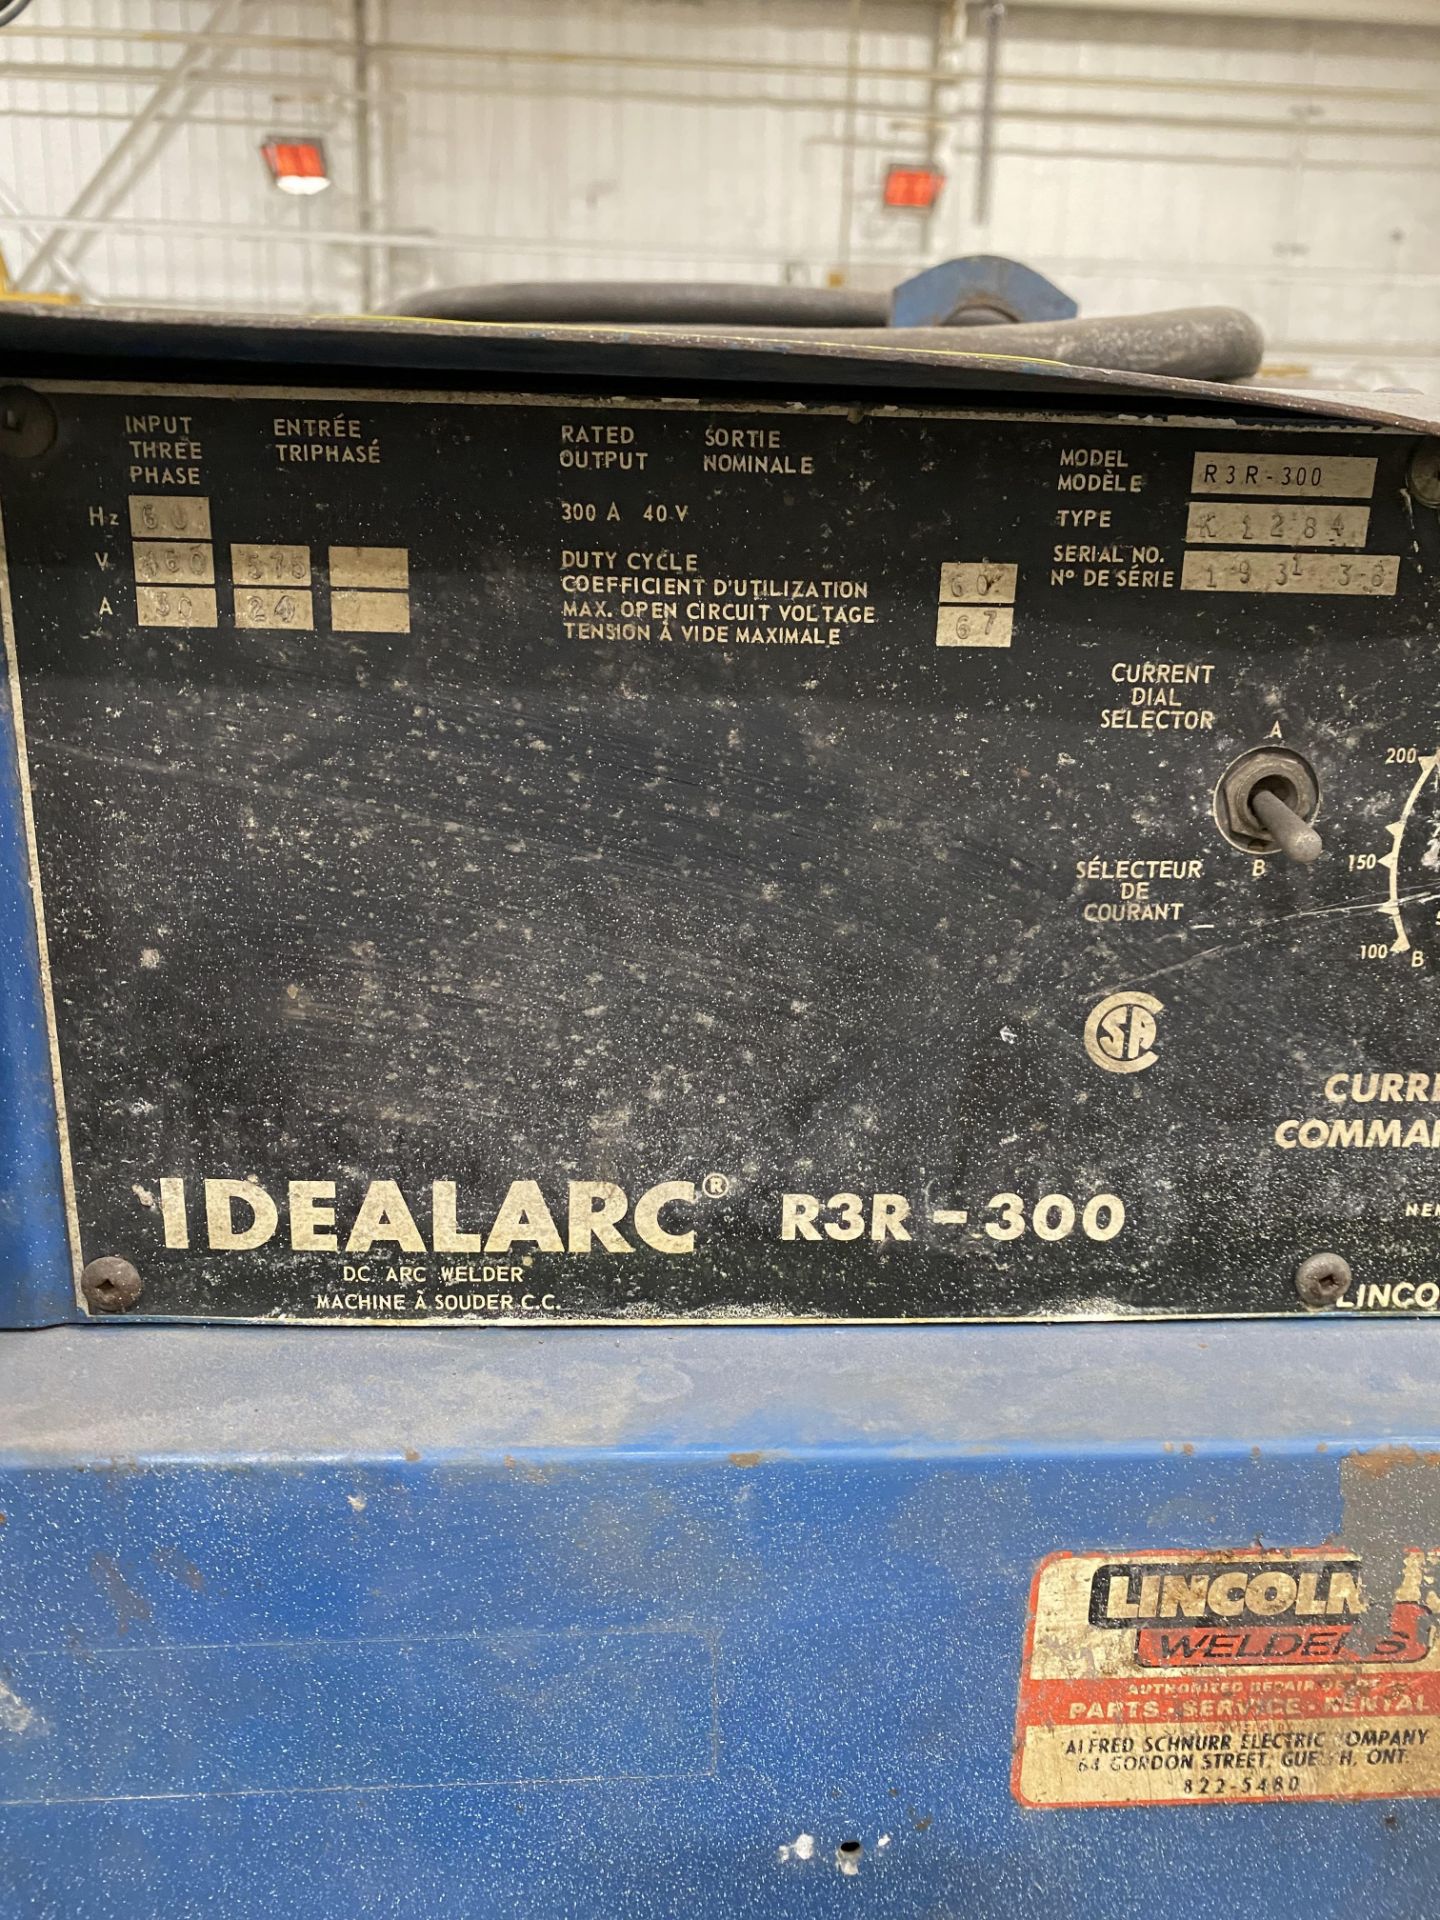 LINCOLN ELECTRIC R3R-300 DC ARC WELDER W/ CART - Image 2 of 2